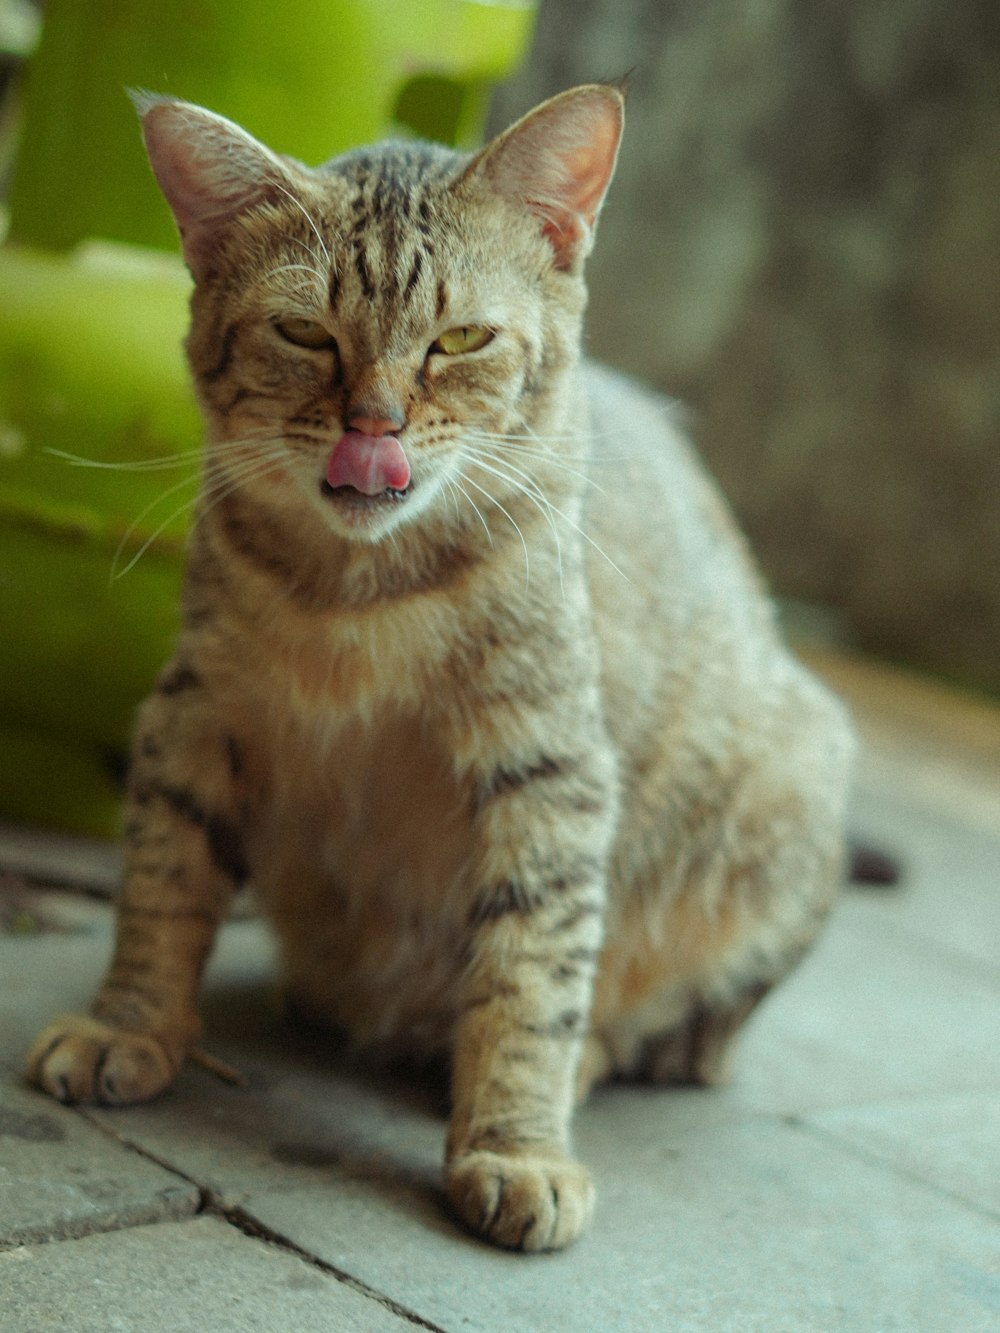 a cat sitting on the ground with its tongue out